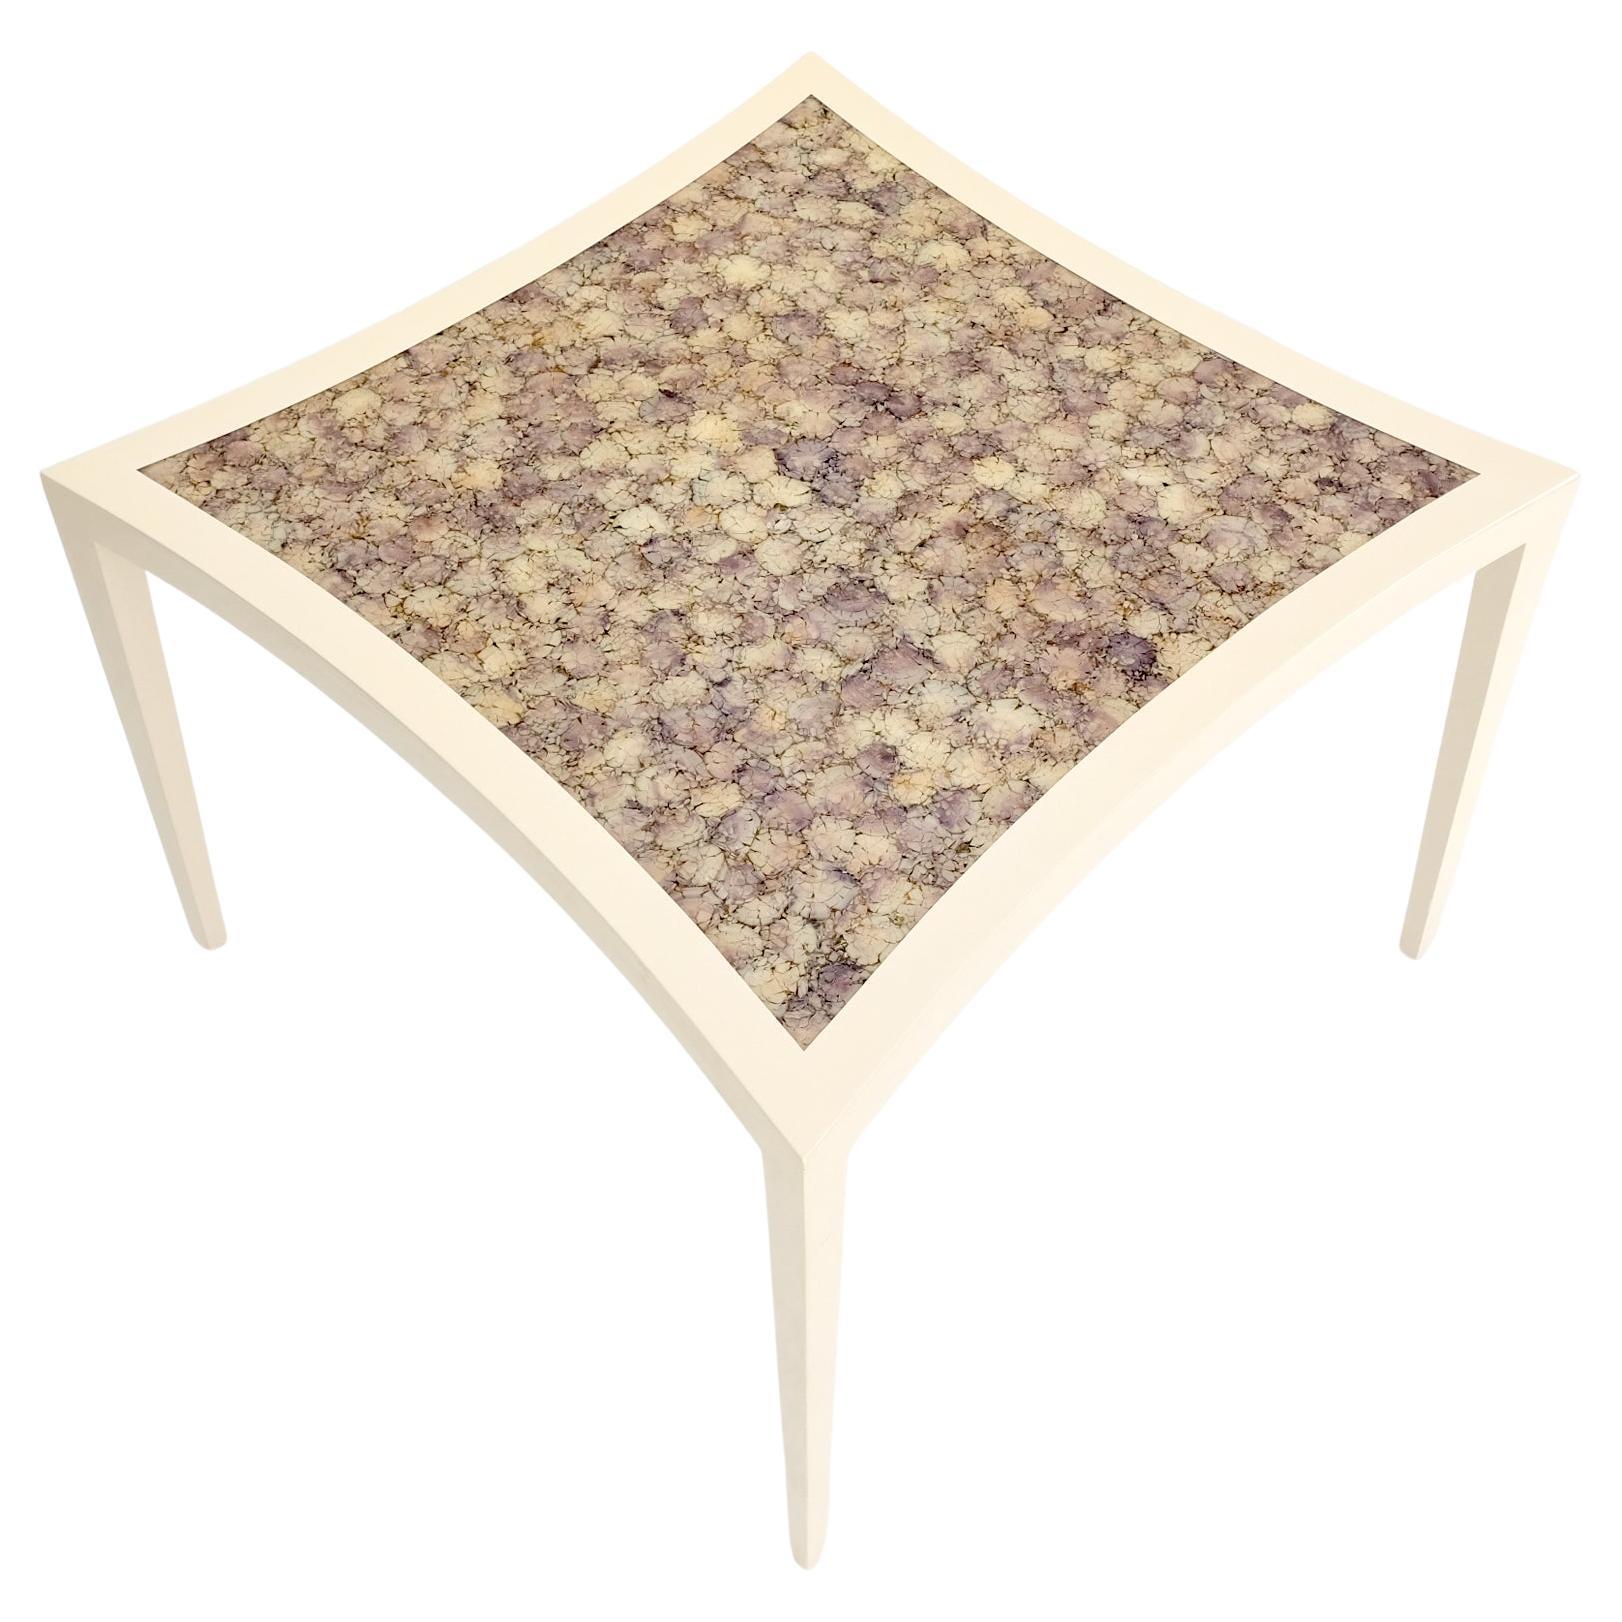 Enrique Garcel diamond shape top white lacquer game dinette table colored crushed shell mosaic top.